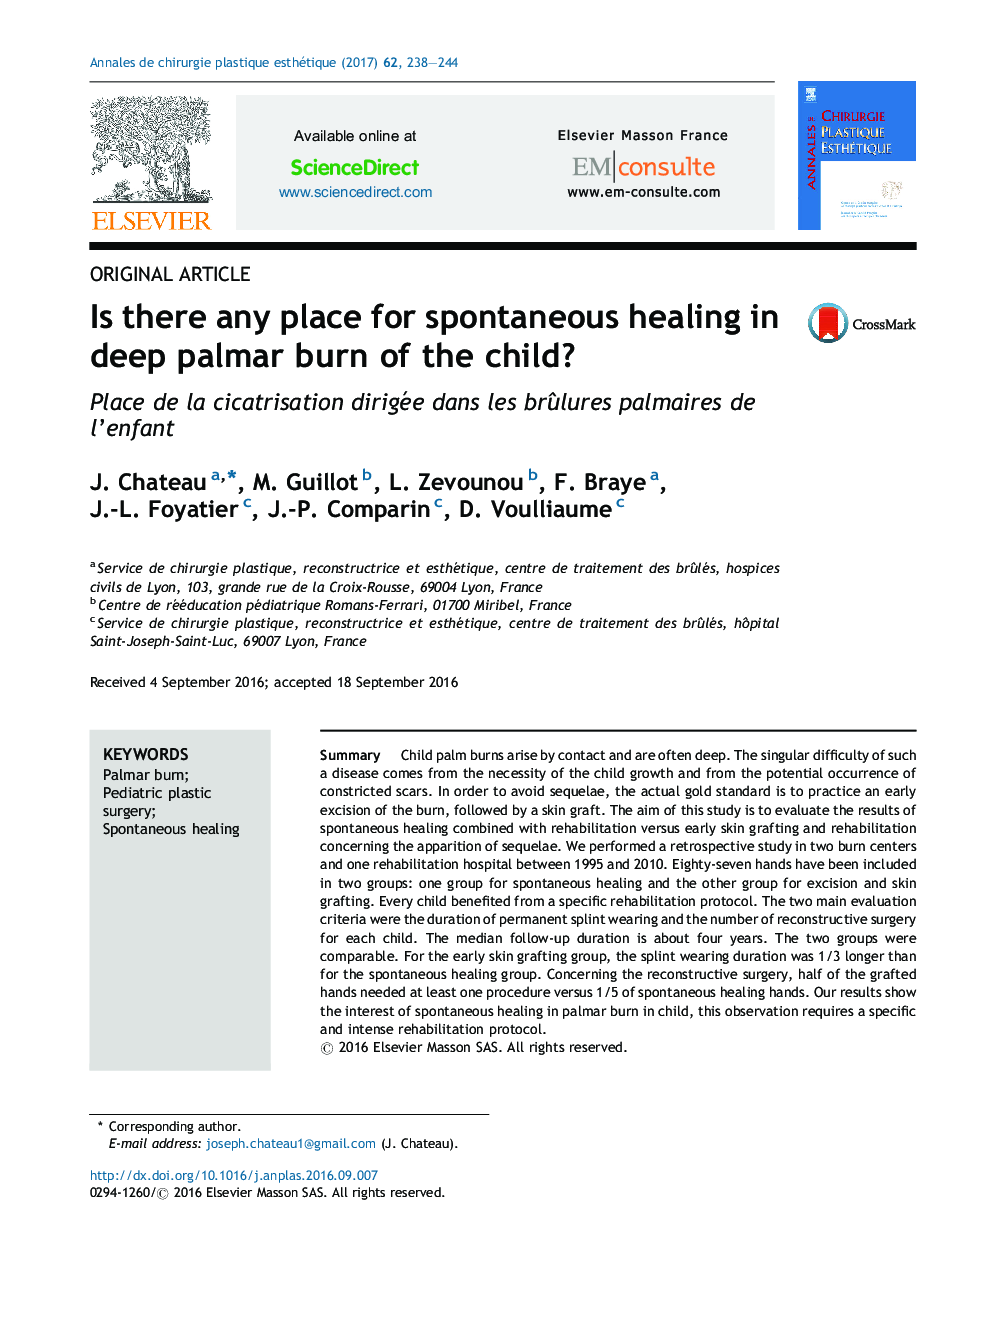 Is there any place for spontaneous healing in deep palmar burn of the child?